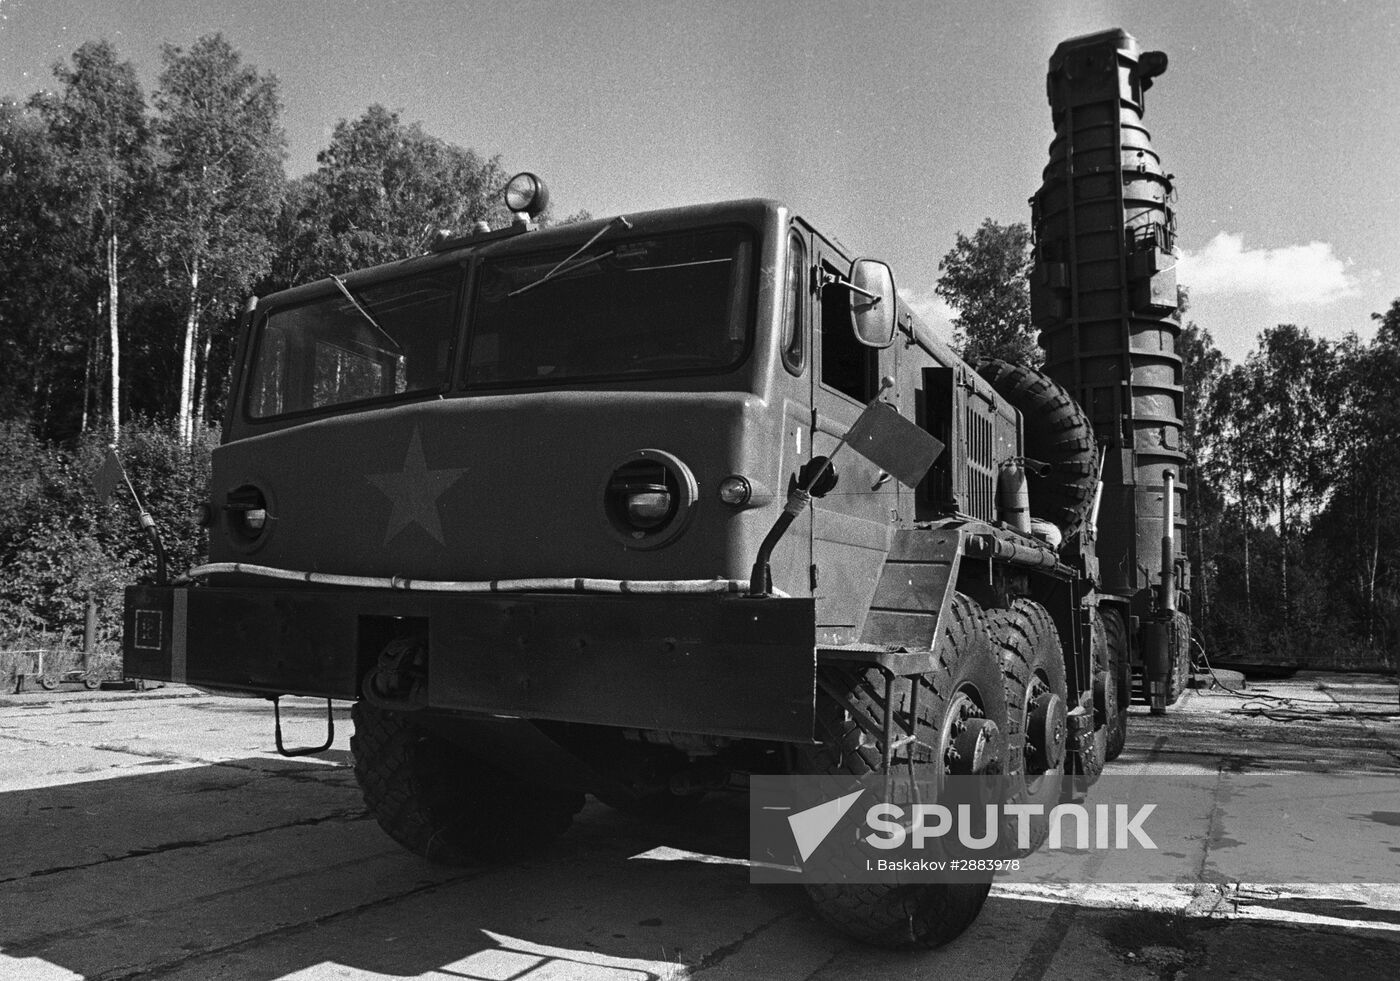 SS-20 missile before launch